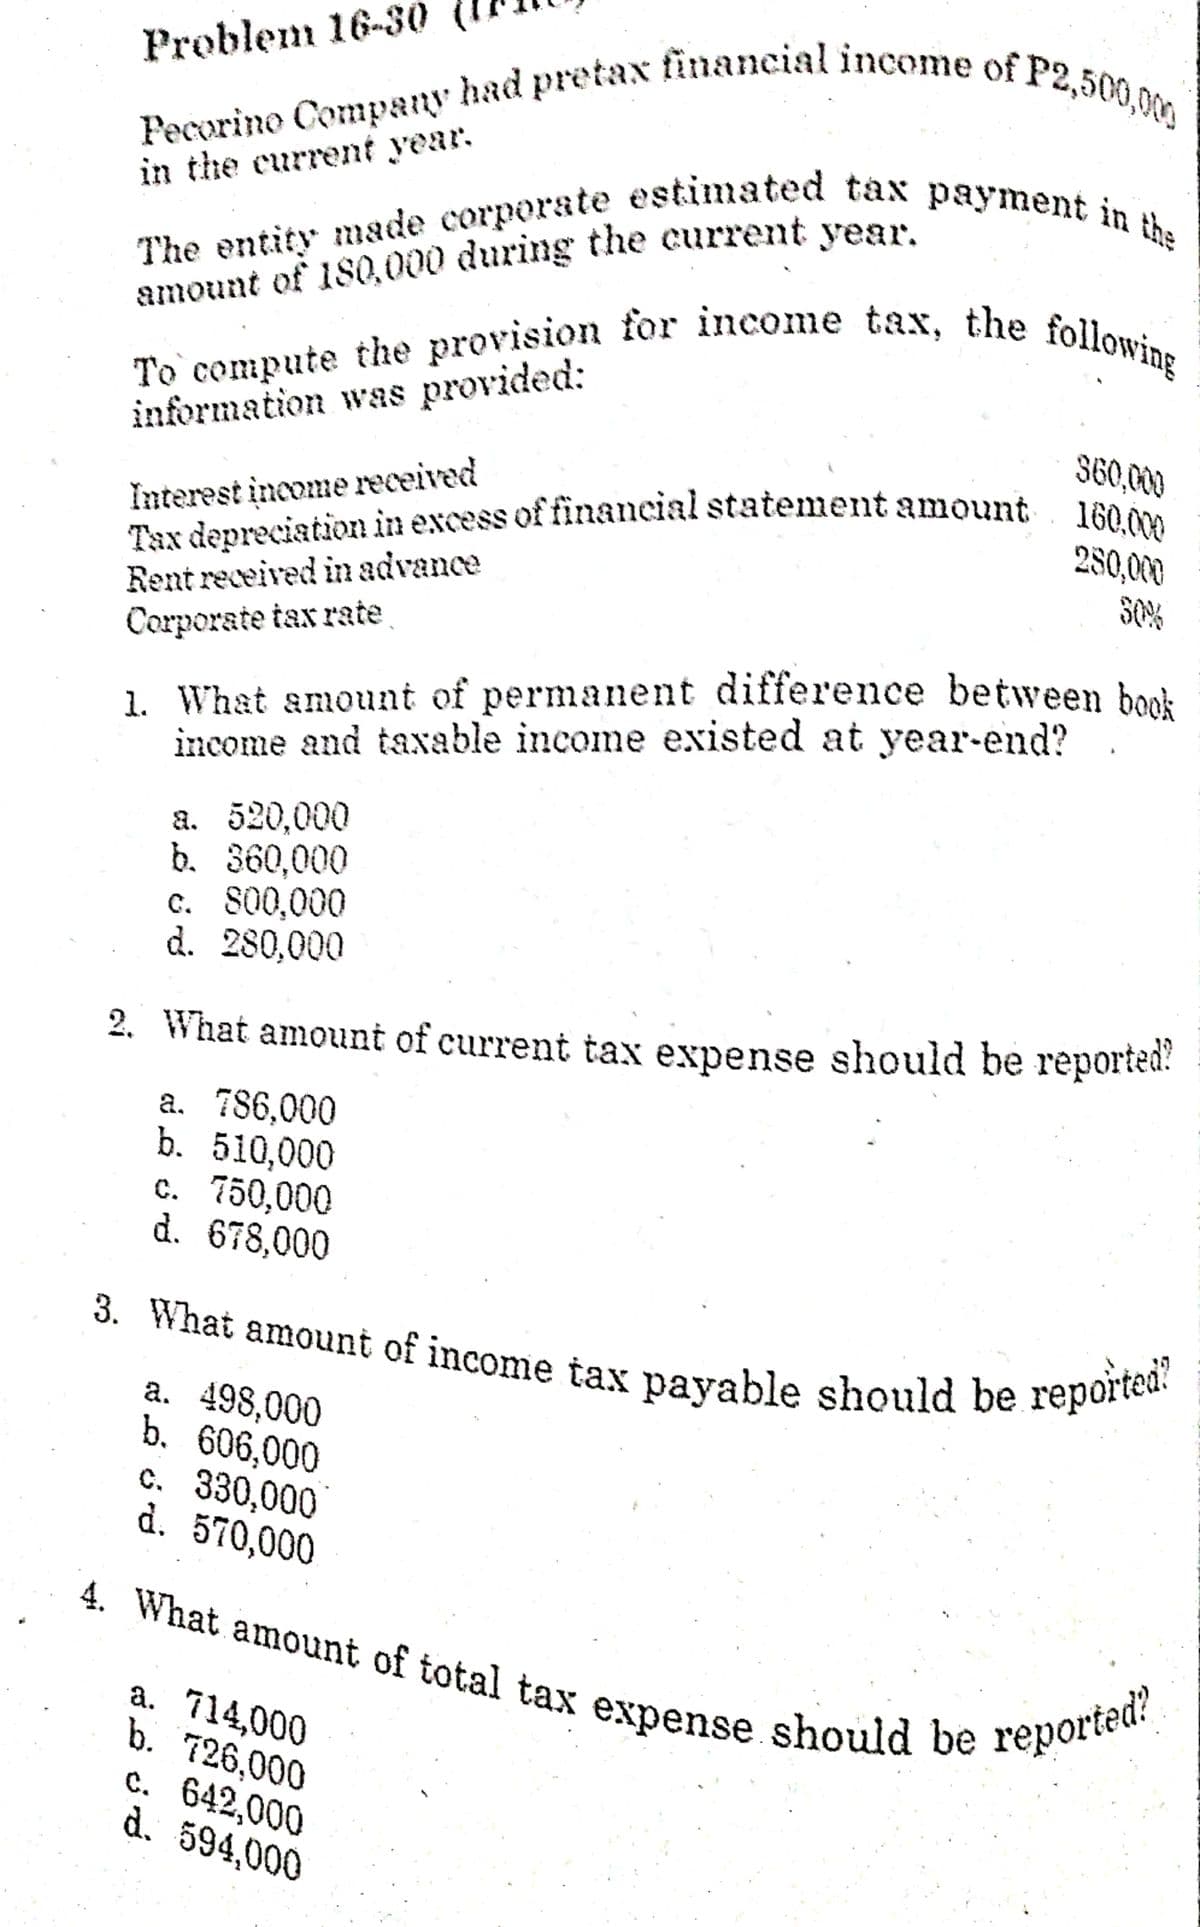 To compute the provision for income tax, the following
3. What amount of income tax payable should be reported?
4. What amount of total tax expense should be reported:
Fecorino Company had pretaxr financial income of P2,500,00g
The entity made corporate estimated tax payment in the
Tax depreciation in excess of financial statement amount 160,000
Problem 16-30
in the current year.
amount of 180, 000 during the current year.
information was provided:
S60,000
Interest income received
Tax depreciation in excess of financial statement amount
280,000
S0%
Rent received in advance
Corporate tax rate
1. What amount of permanent difference between boo
income and taxable income existed at year-end?
a. 520,000
b. 360,000
c. 800,000
d. 280,000
2. What amount of current tax expense should be reported?
a. 786,000
b. 510,000
c. 750,000
d. 678,000
3. What amount of income tax pavable should be reporer
a. 498,000
b. 606,000
c. 330,000
d. 570,000
a. 714,000
b. 726,000
c. 642,000
d. 594,000
